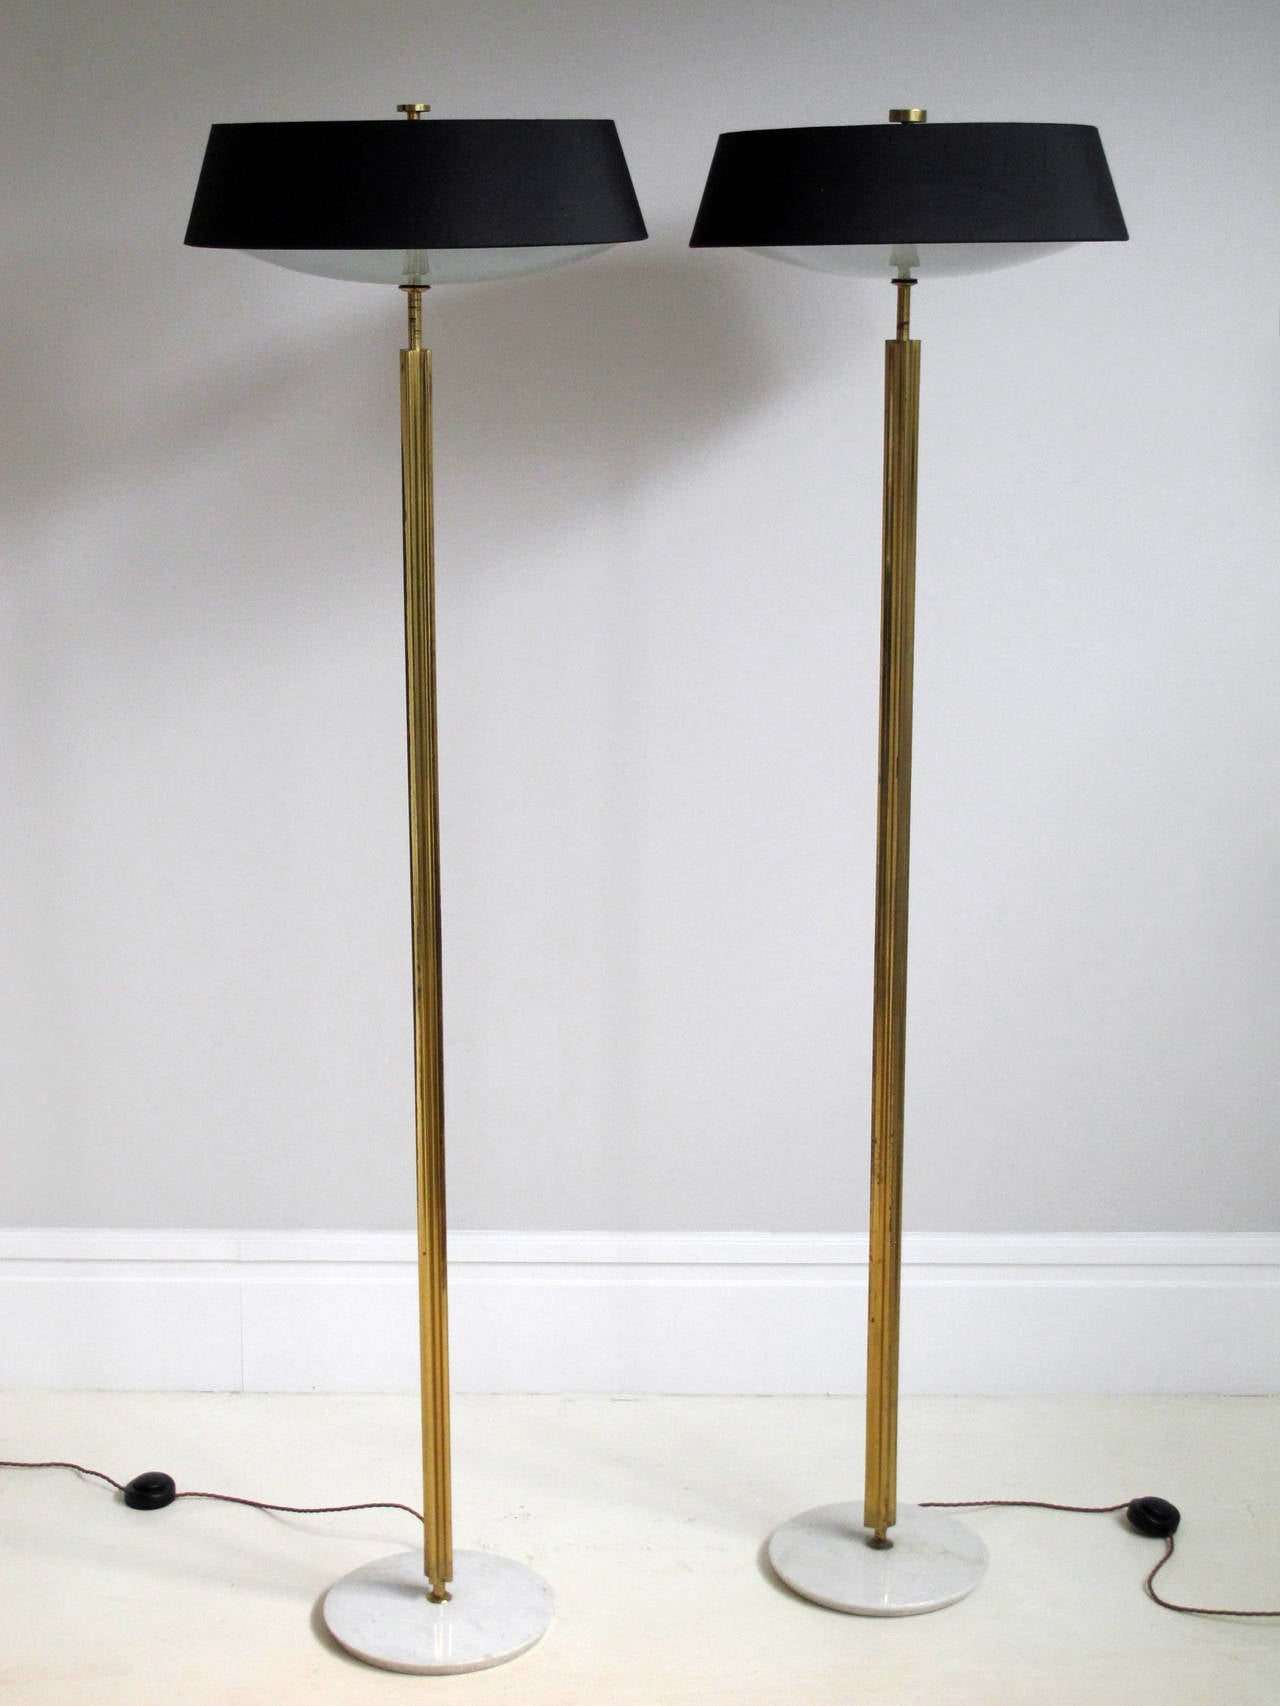 Pair of standing lamps in brass, marble and glass.
Produced by Arredoluce.
circa 1955.
Italy.